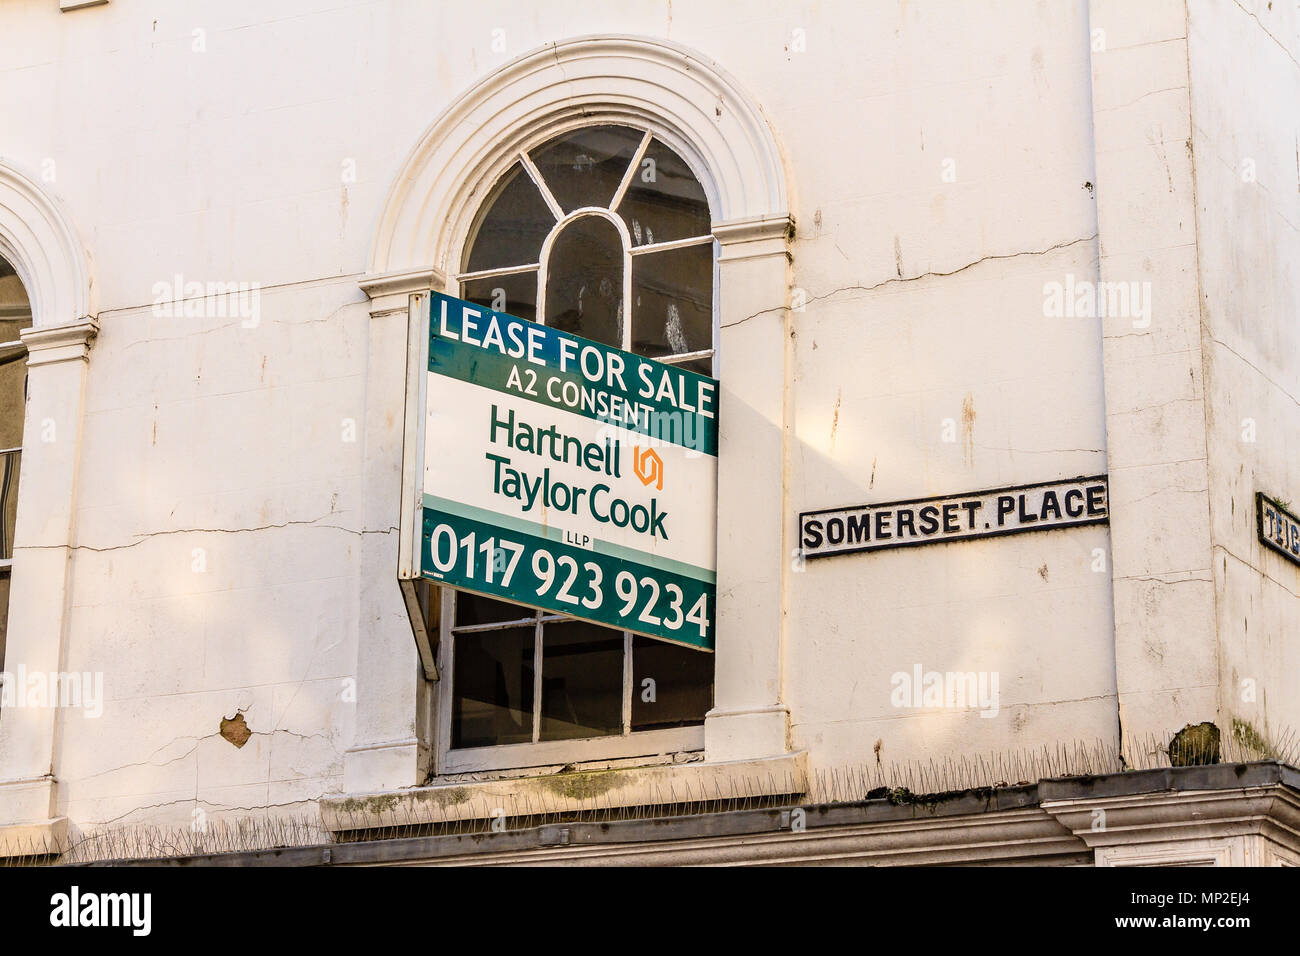 Hartnell, Taylor, Cook sign advertising lease for sale on a property in Teignmouth, Devon. Feb 2018. Stock Photo